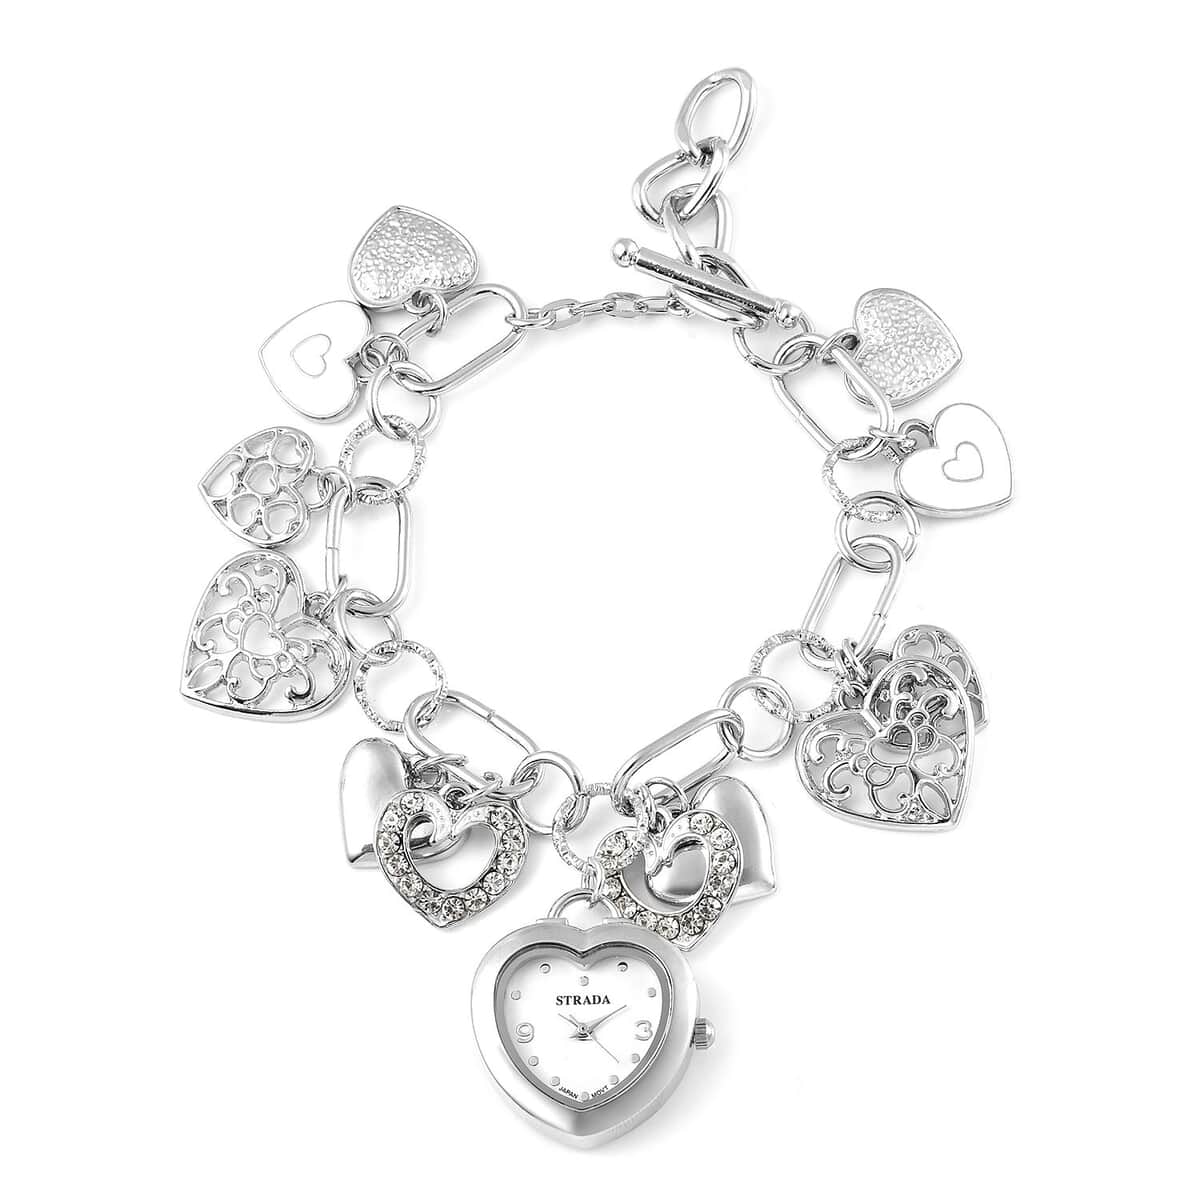 STRADA White Austrian Crystal, Enameled Japanese Movement Charm Heart Bracelet Watch in Silvertone (7.5-9 in) image number 0